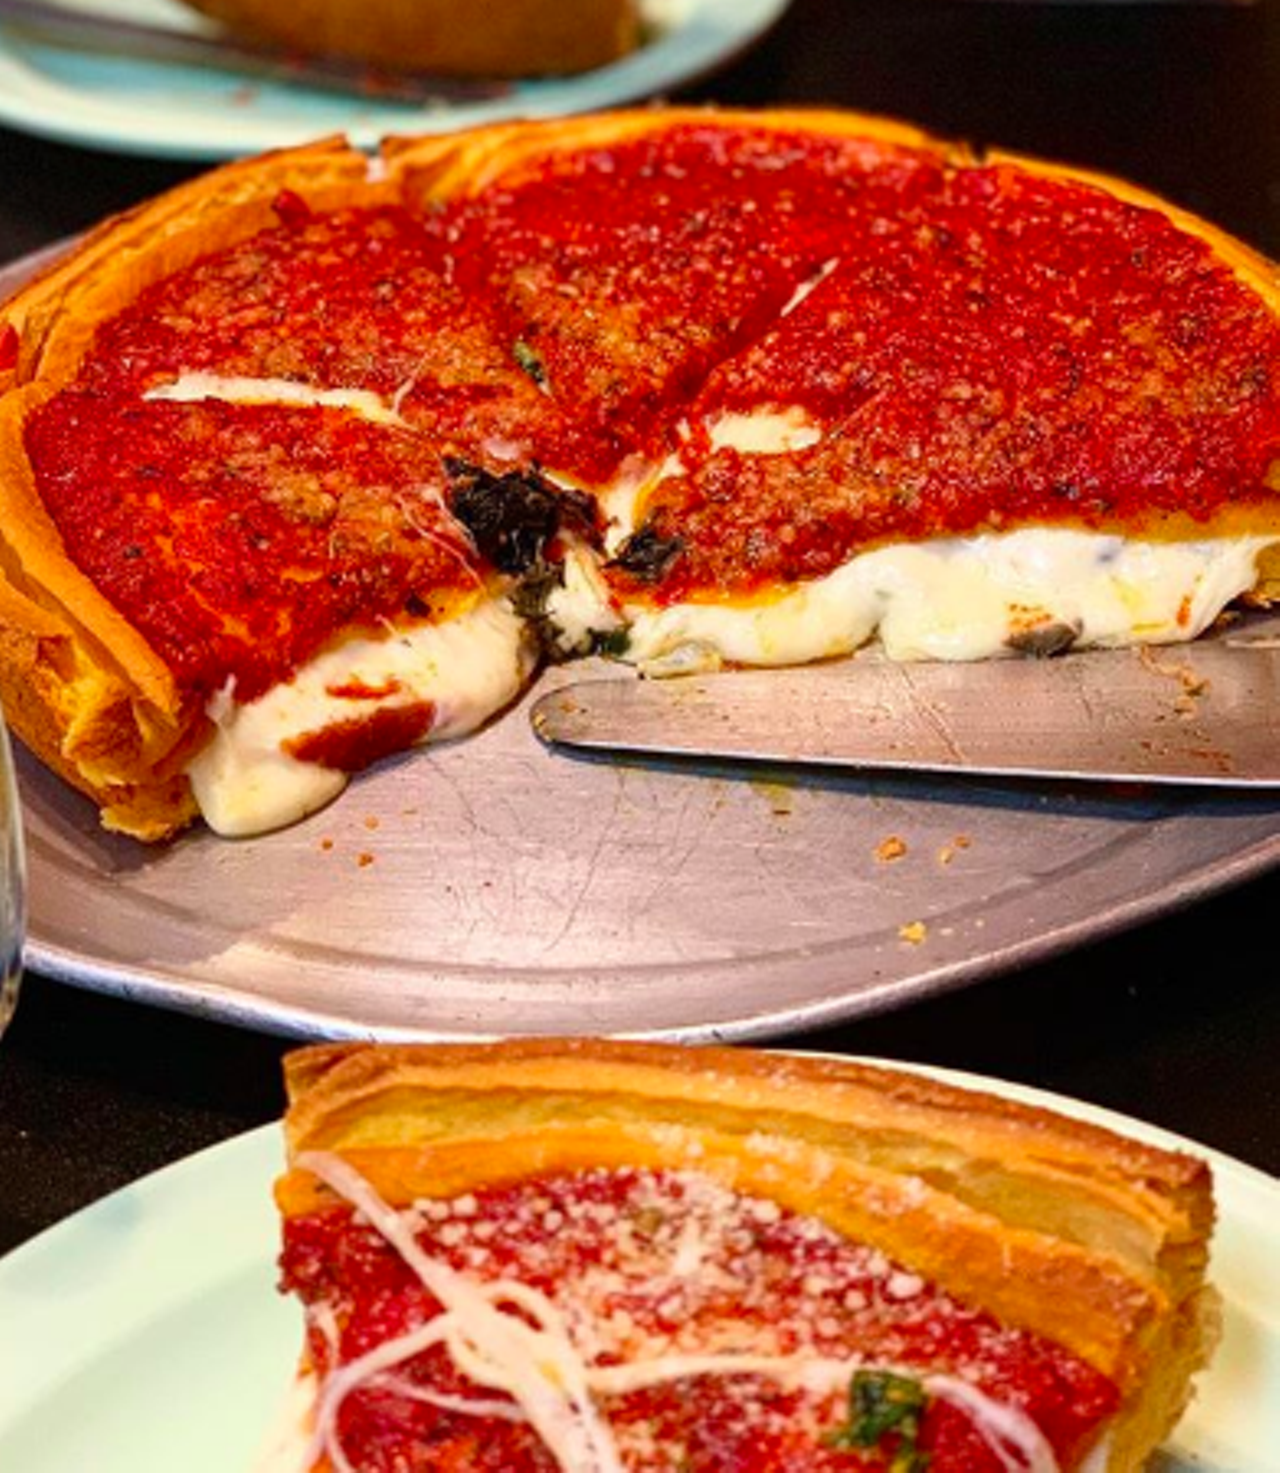 Chicago’s Pizza
5525 Blanco Road, (210) 349-8005, orderchicagospizzamenu.com
If you’re more of a Chicago-style type of guy/gal, you’ll be smart to try Chicago’s Pizza sometime. Here you’ll find classic deep-dish pizza and other Italian dishes. Choose from cheese, seafood or veggie, or create your own four-topping pie.
Photo via Instagram / milkbutterandeggs